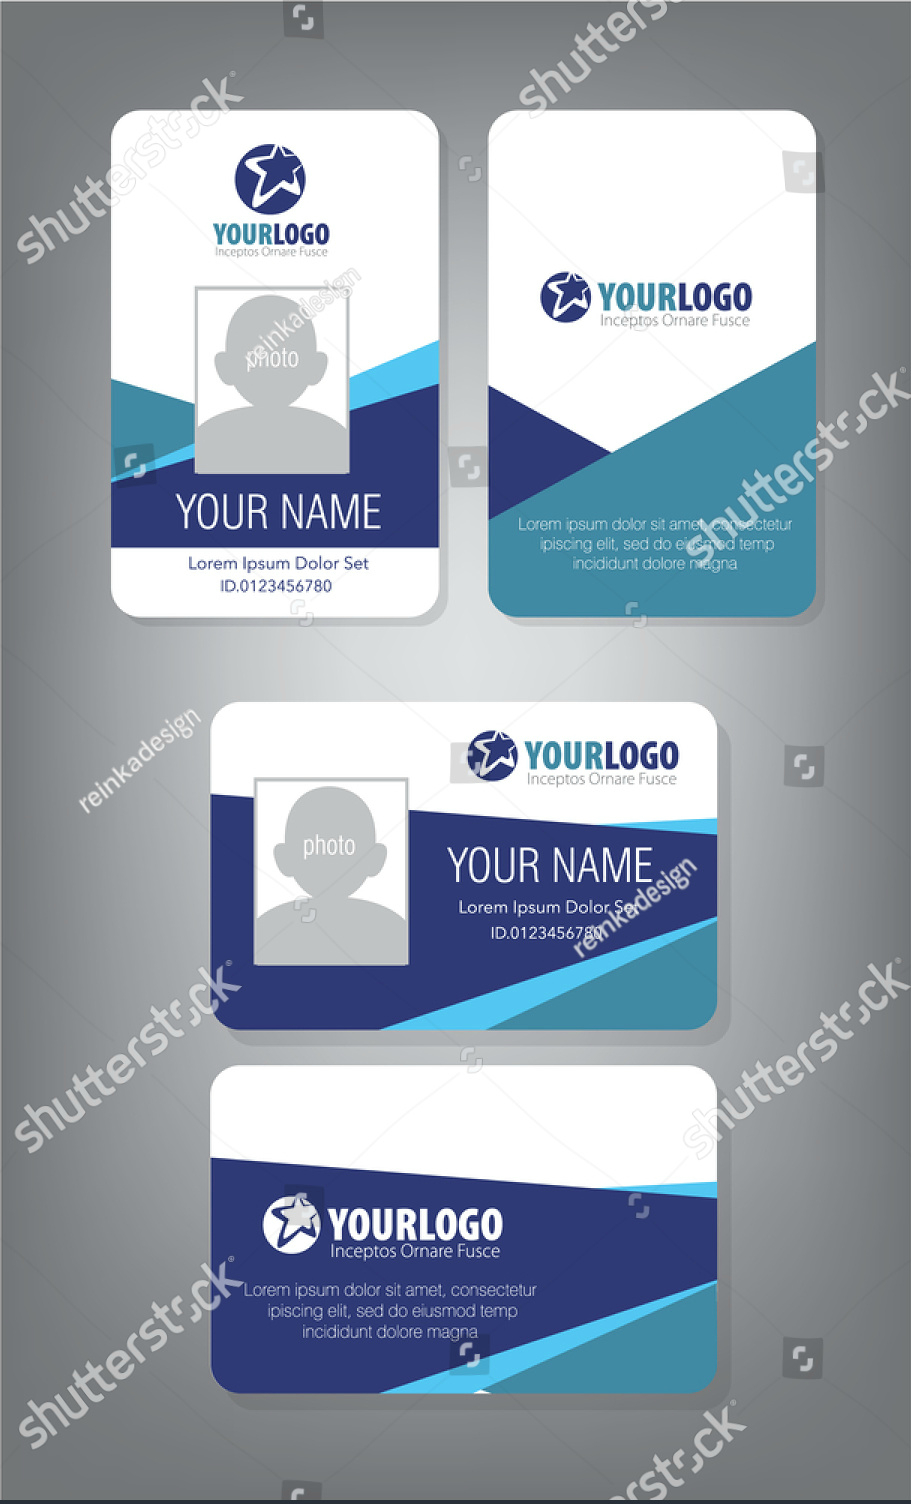 43+ Professional Id Card Designs – Psd, Eps, Ai, Word | Free Throughout Id Card Design Template Psd Free Download